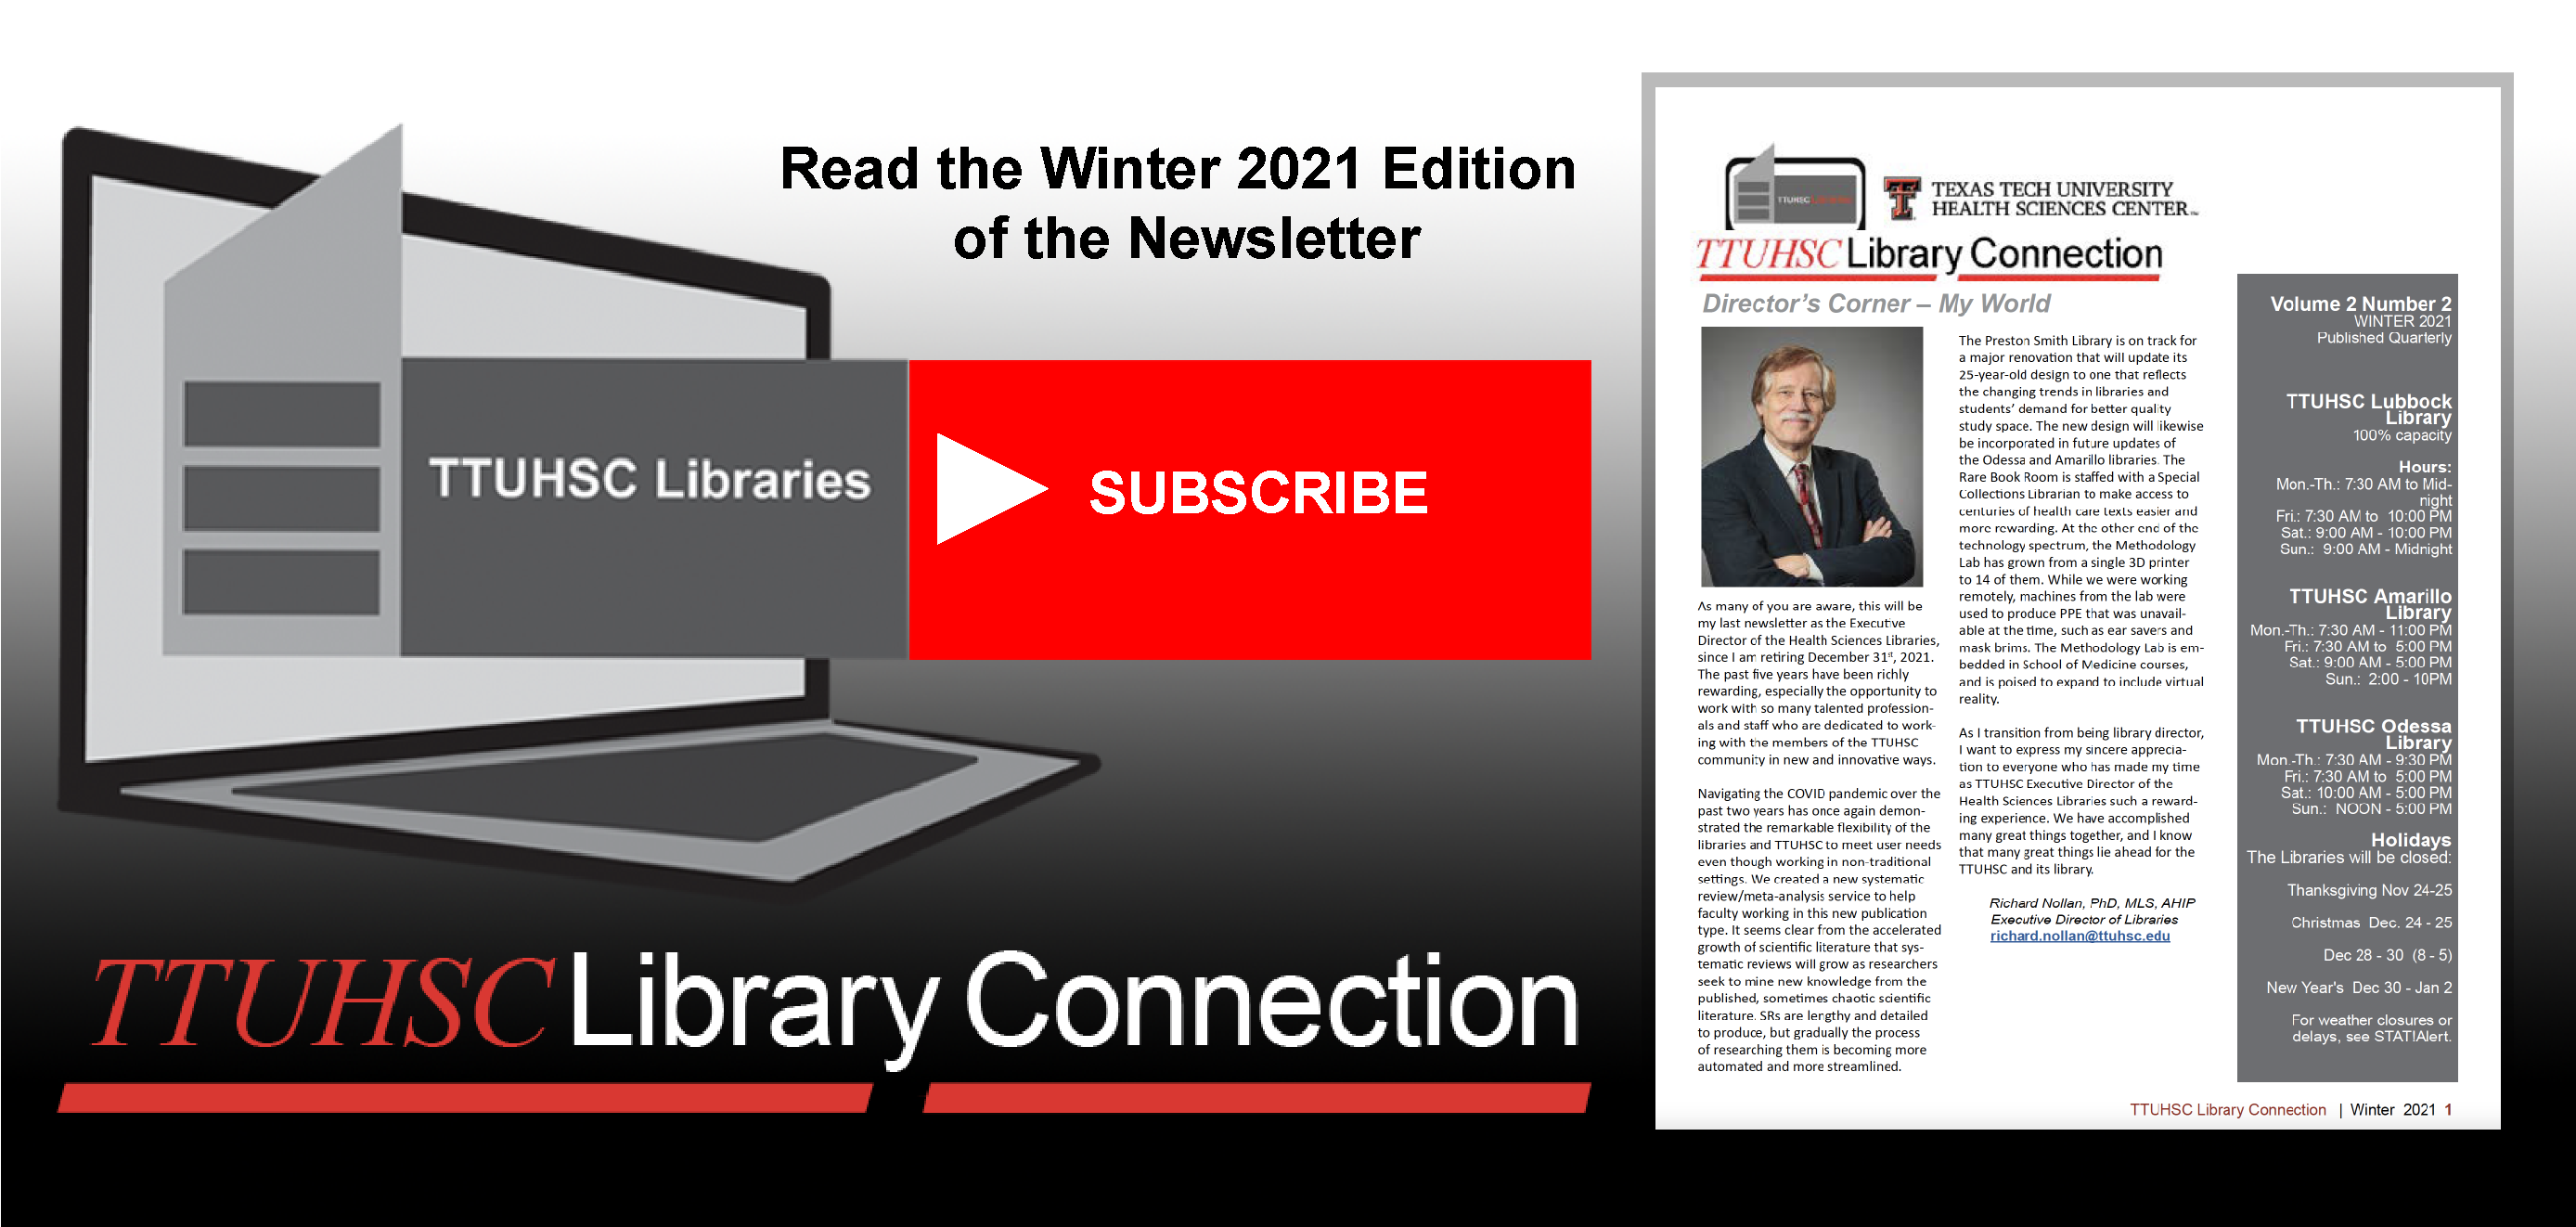 Read the newest edition of the library newsletter.